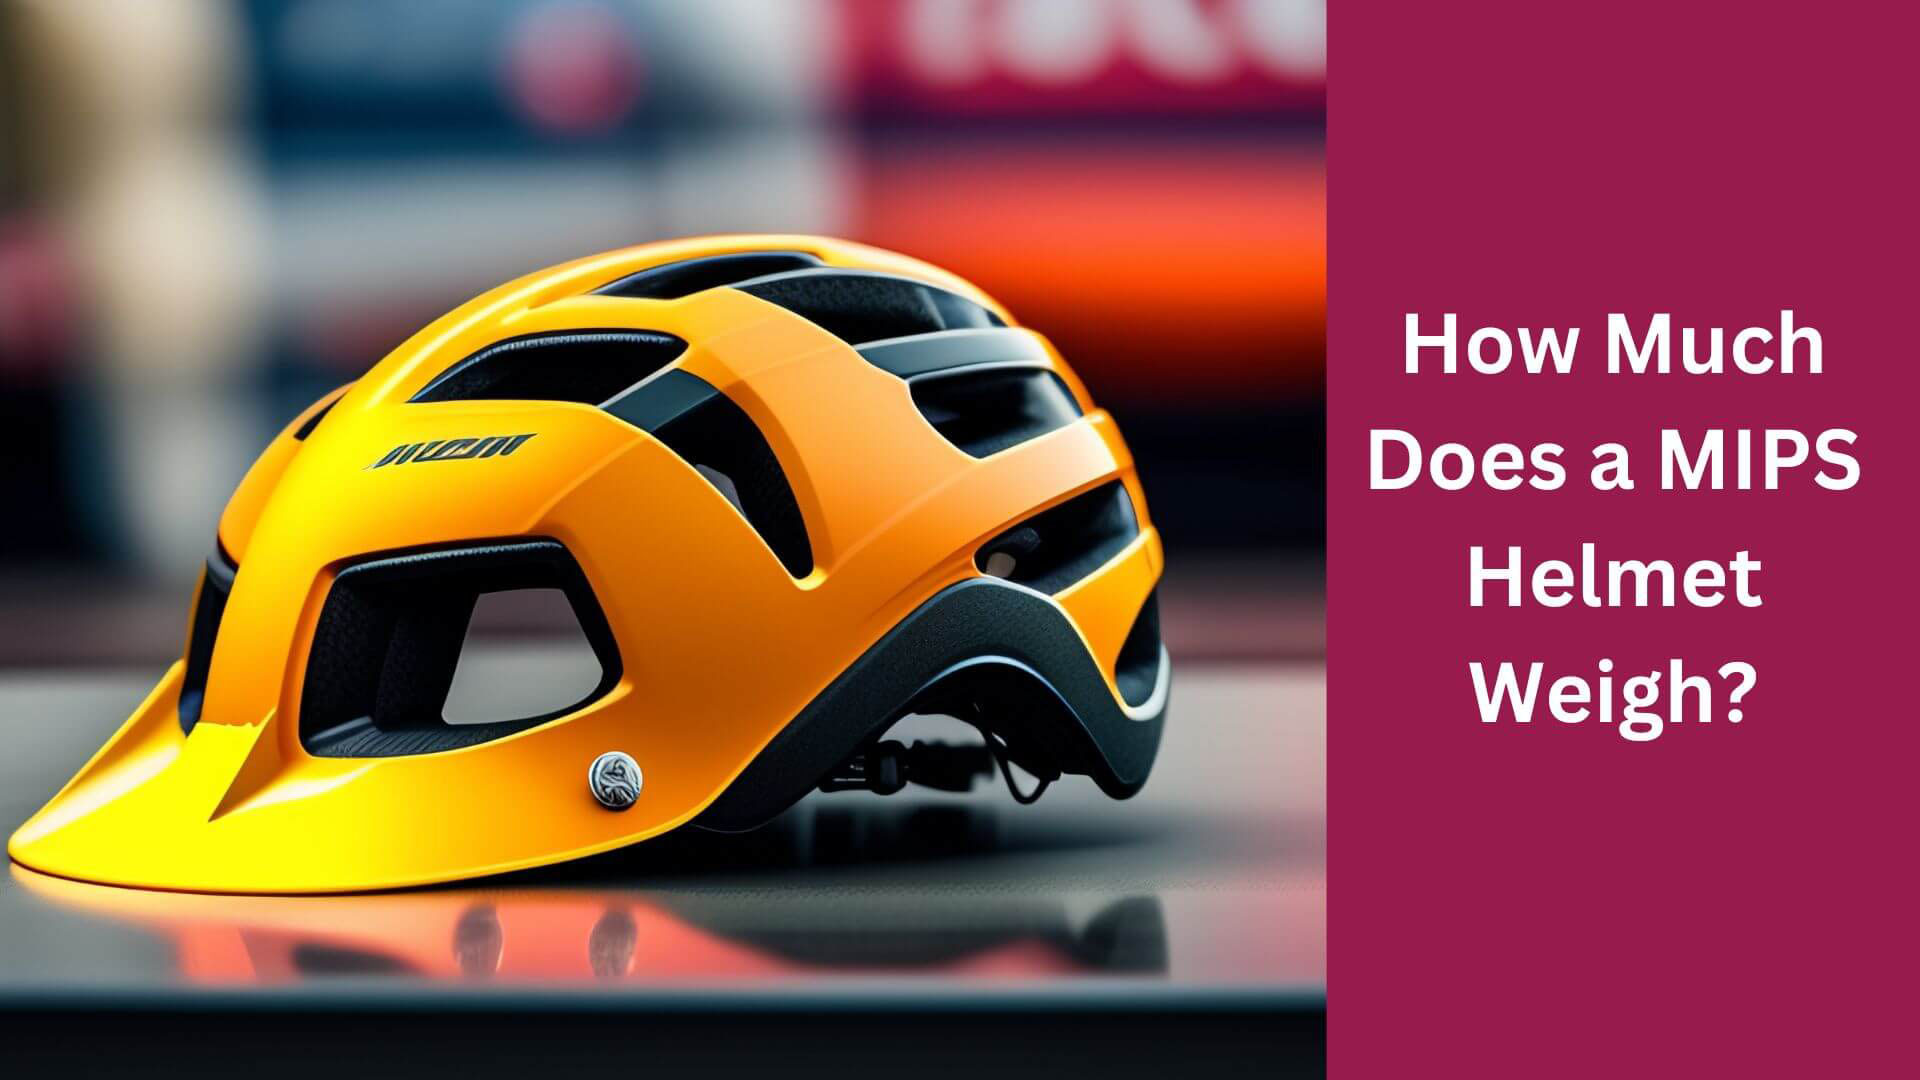 How Much Does a MIPS Helmet Weigh?